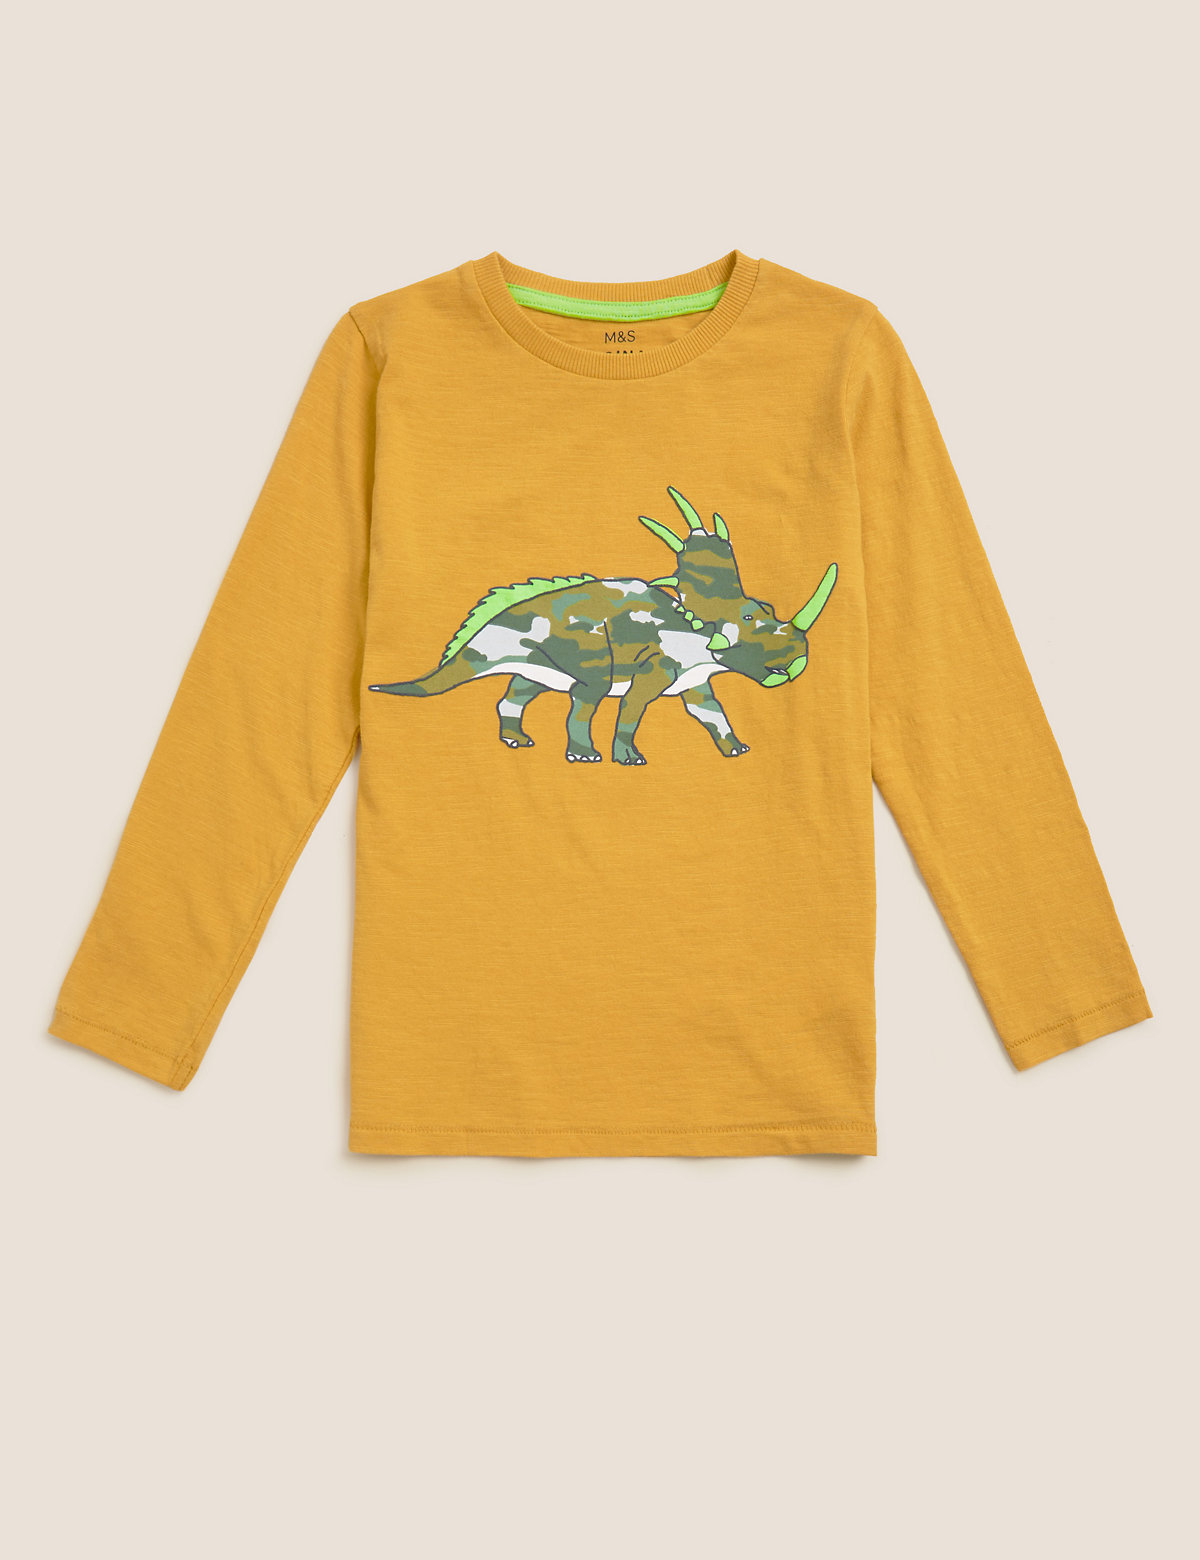 Cotton Camouflage Triceratops Top